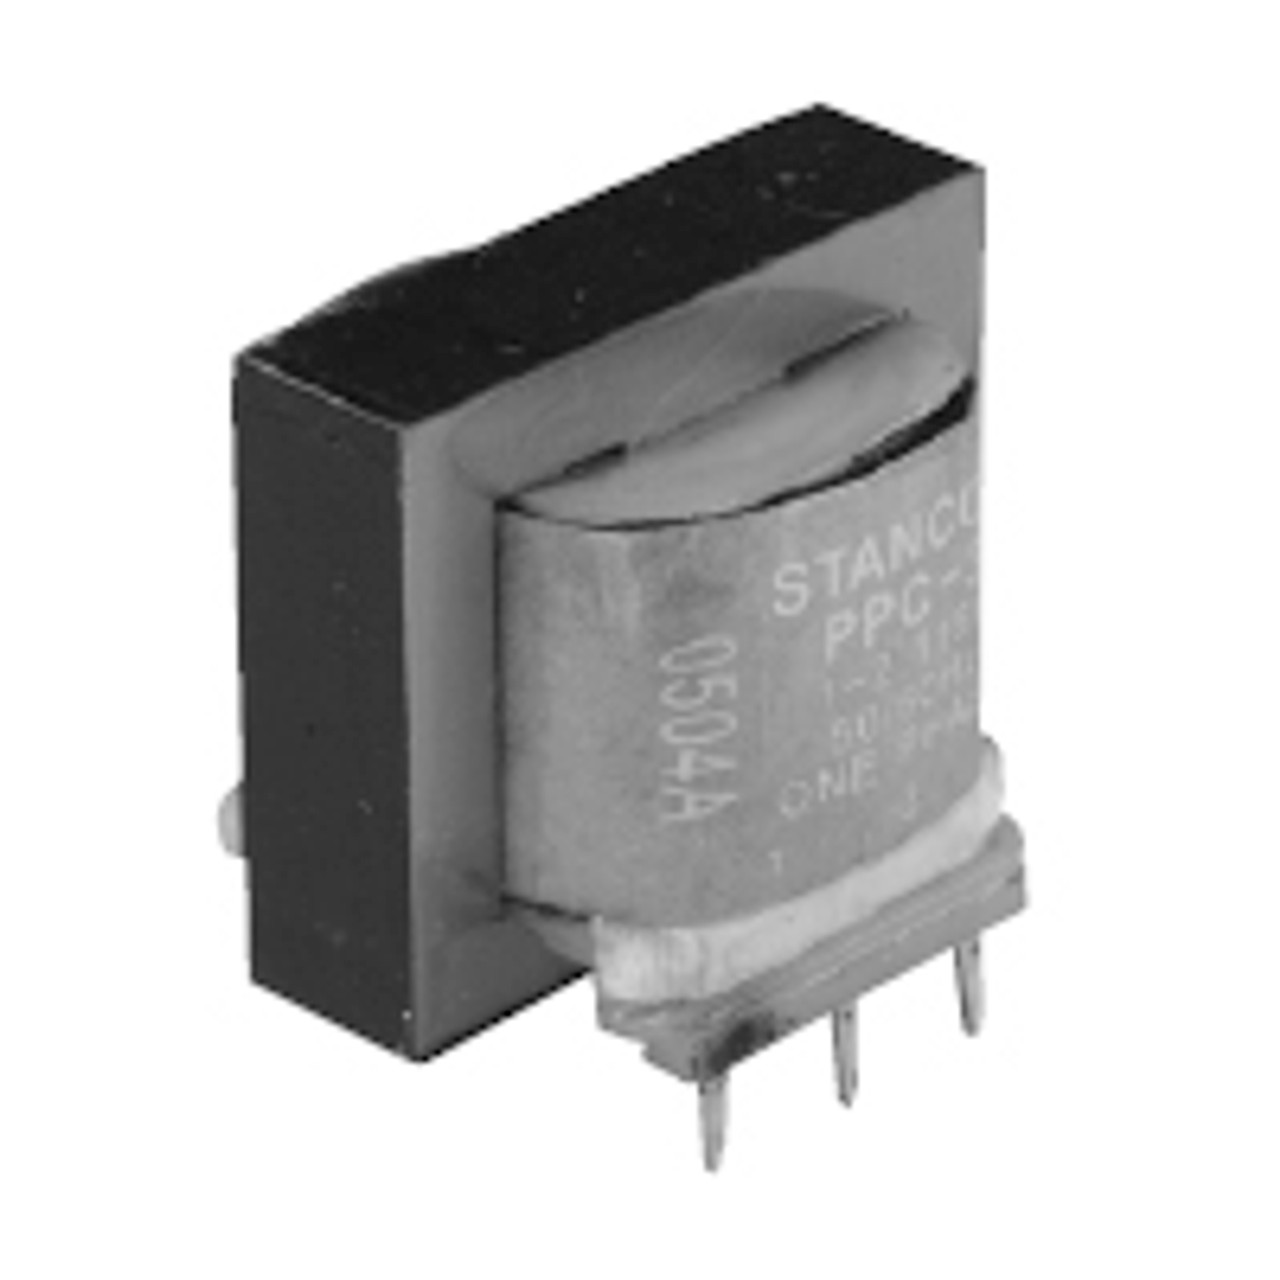 Stancor / White Rodgers PPC-2 Printed Circuit Transformers